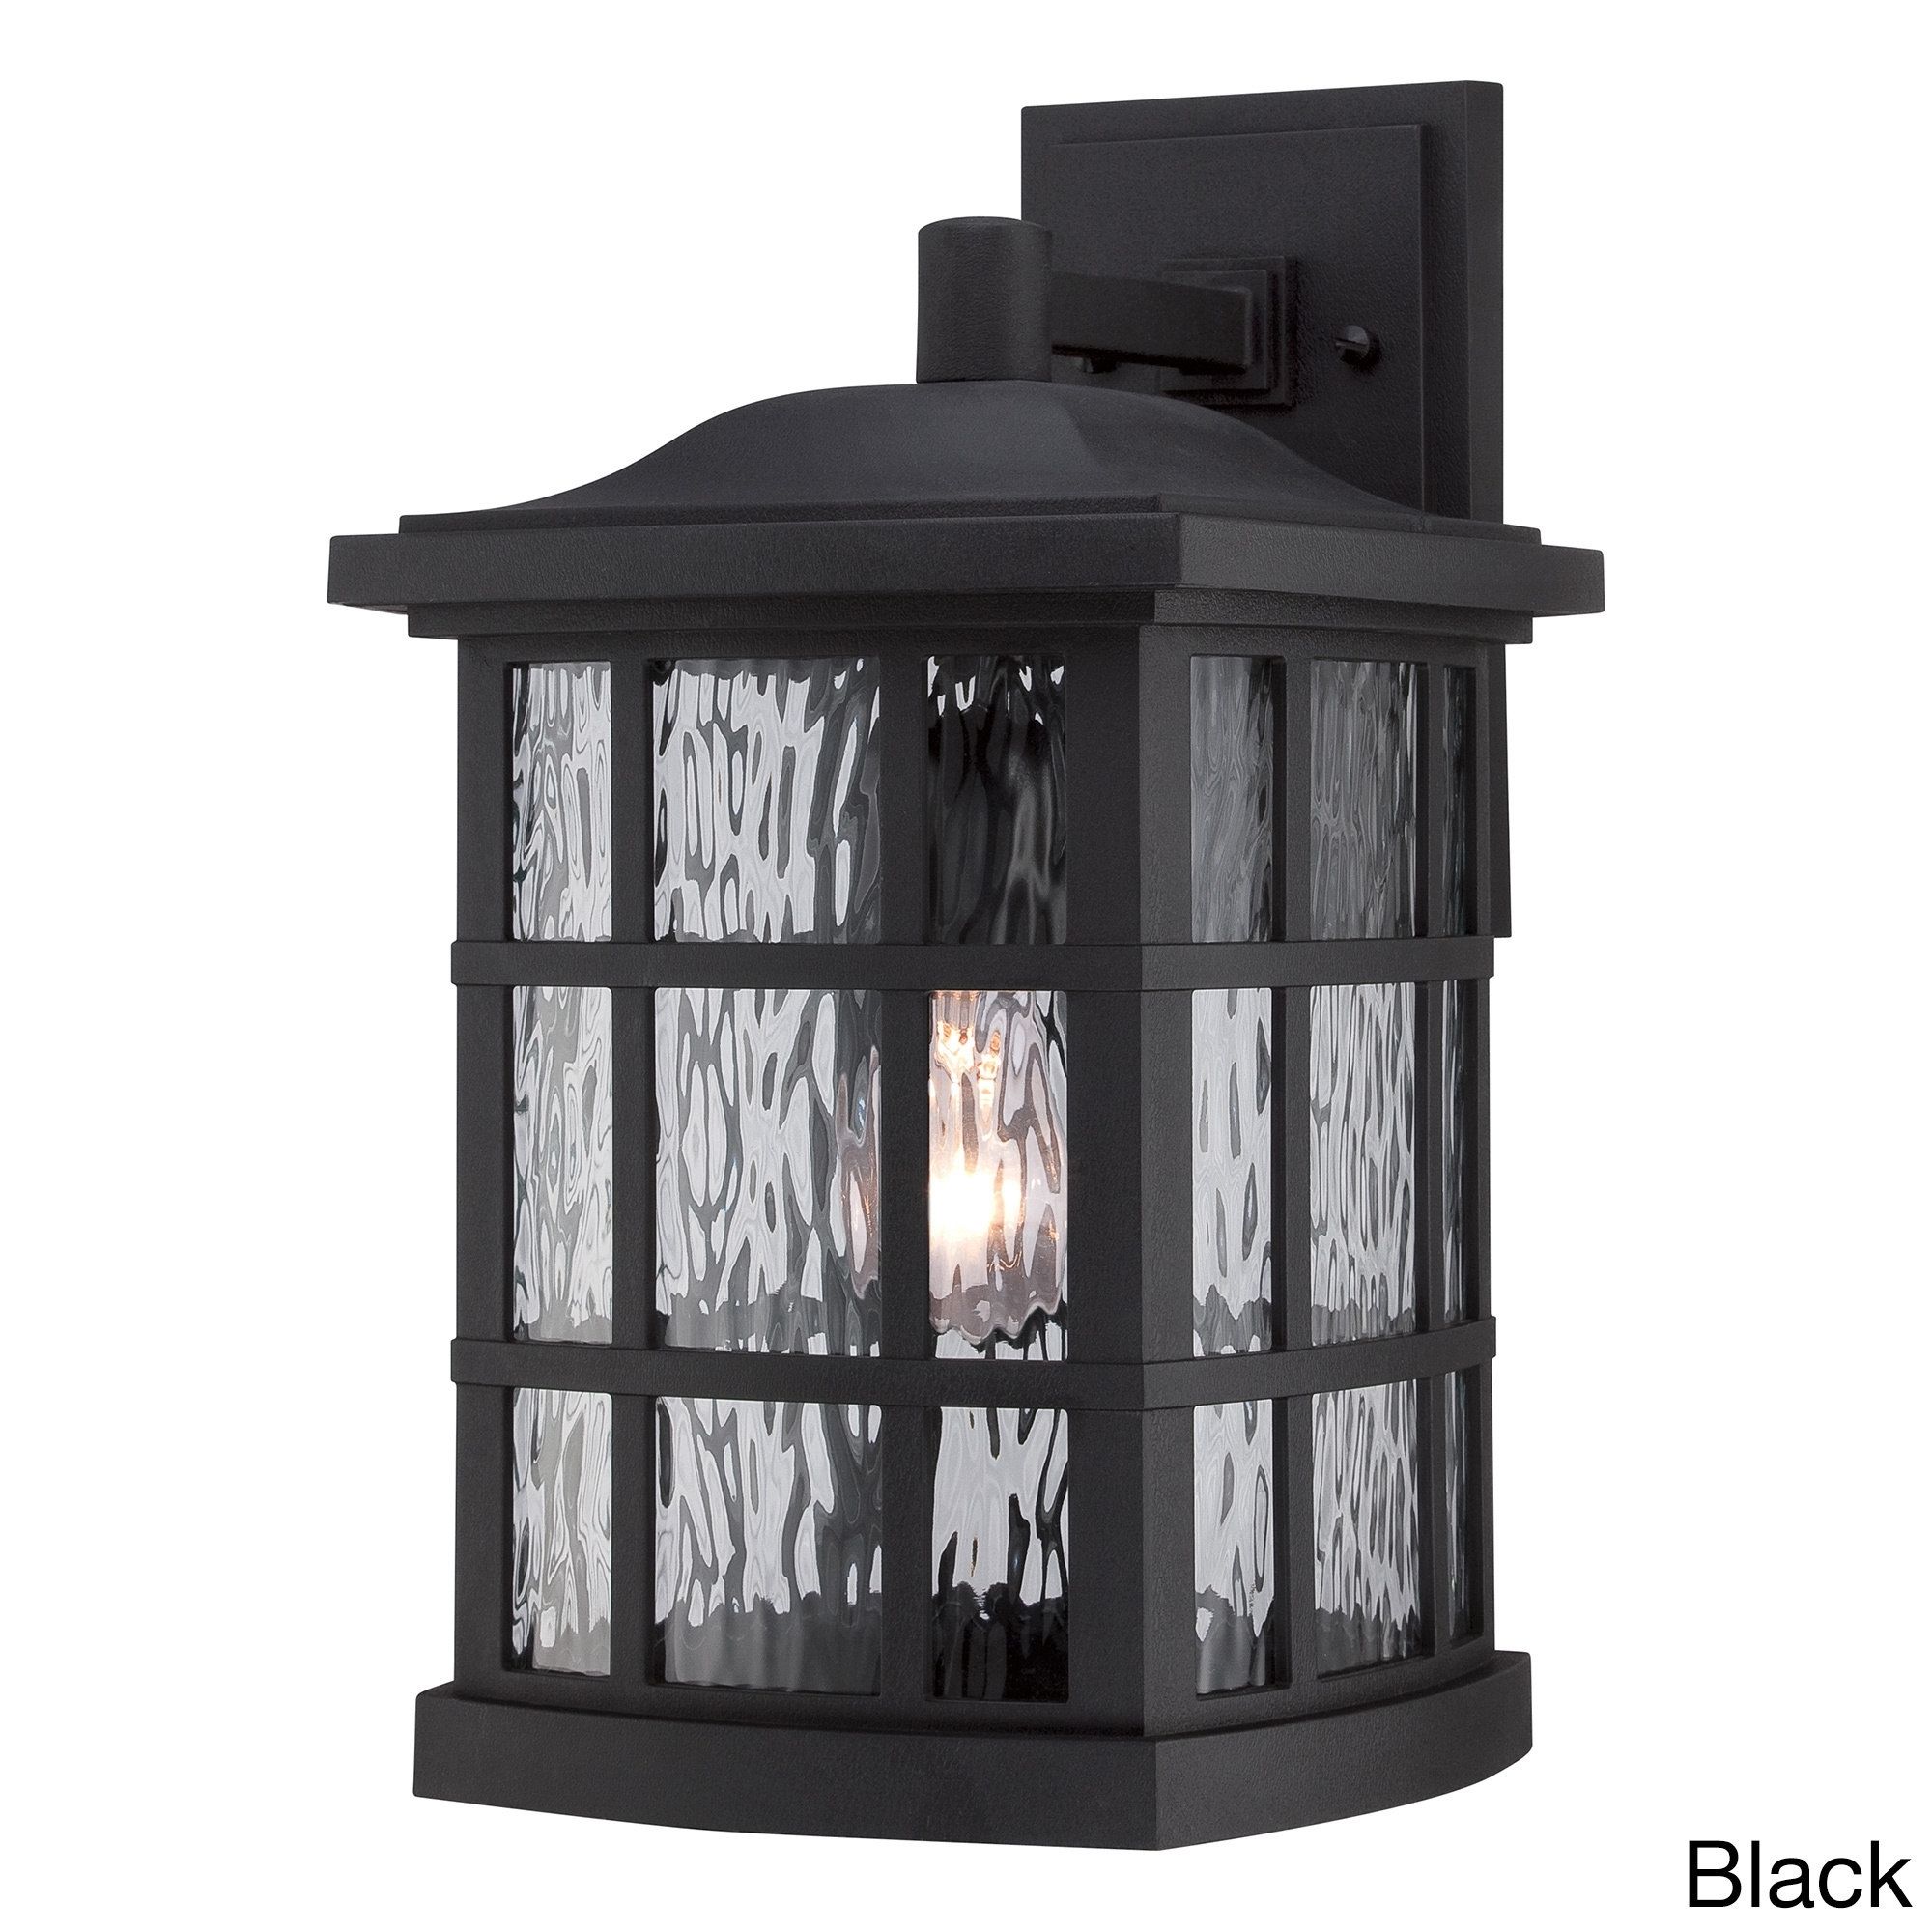 Quoizel Outdoor Lighting For Less | Overstock For Quoizel Outdoor Wall Lighting (View 10 of 15)